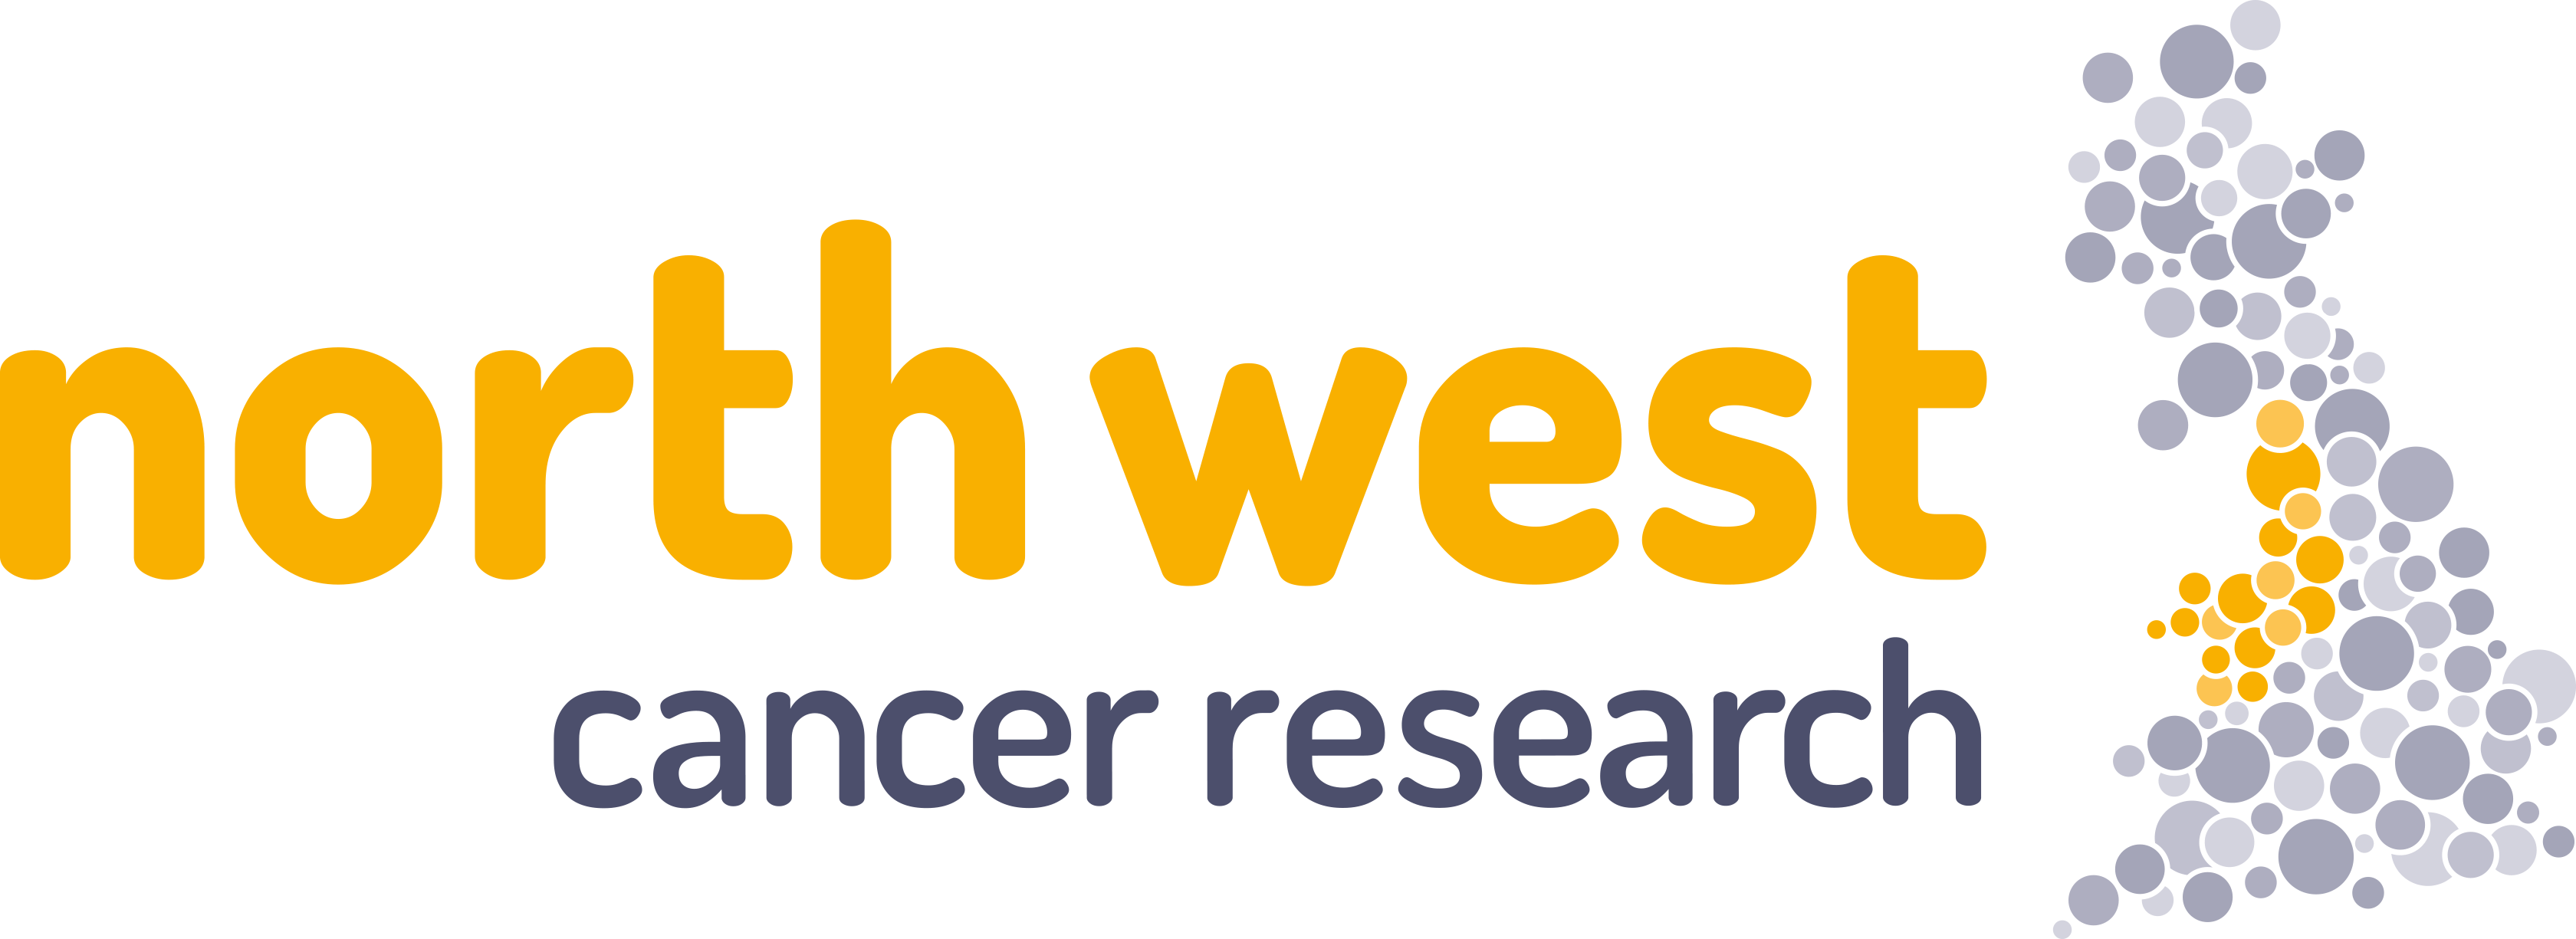 North west cancer research logo